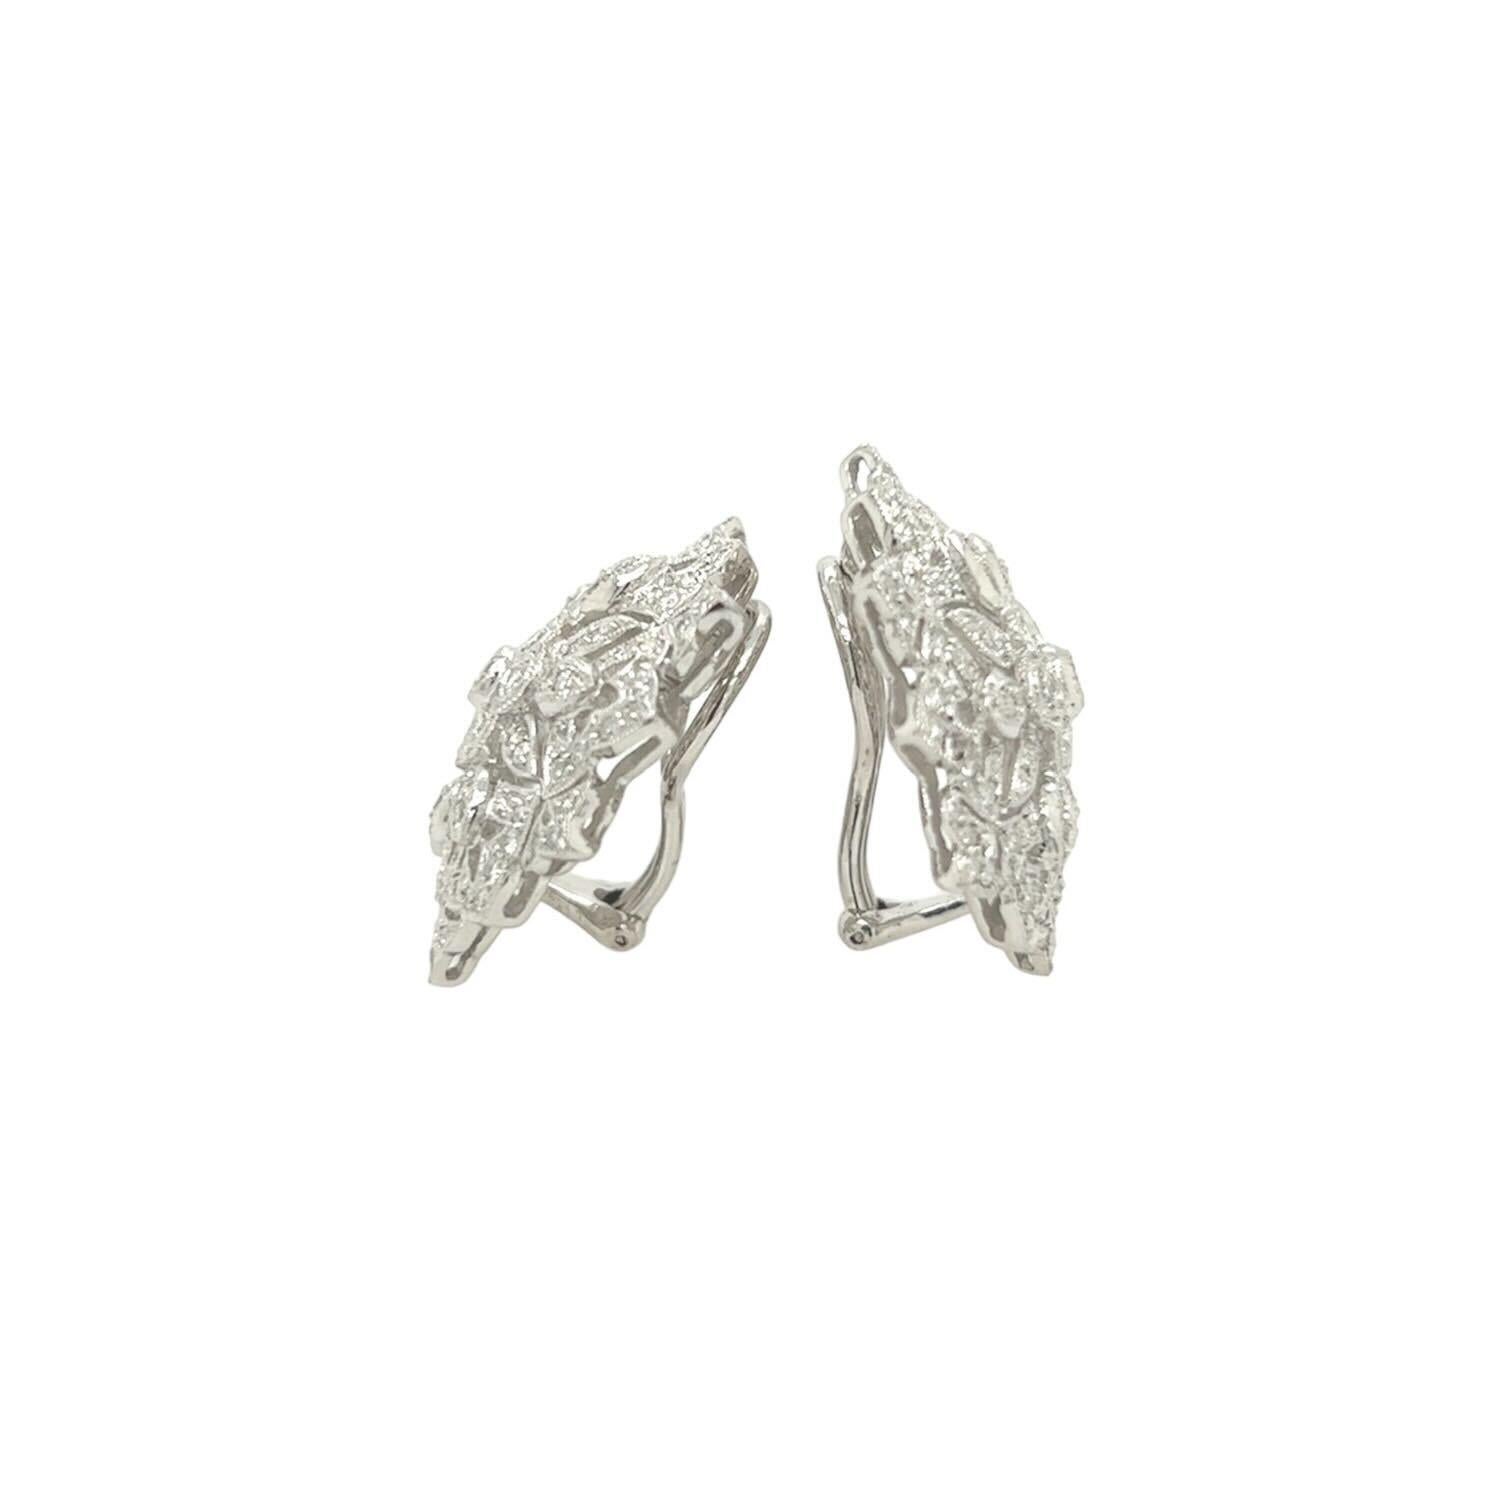 A pair of 18 karat white gold and diamond earclips.  Each earclip designed as openwork floral motif set all over with approximately one hundred three  round brilliant cut diamonds within milgrain edges.  Total diamond weight approximately 4.60